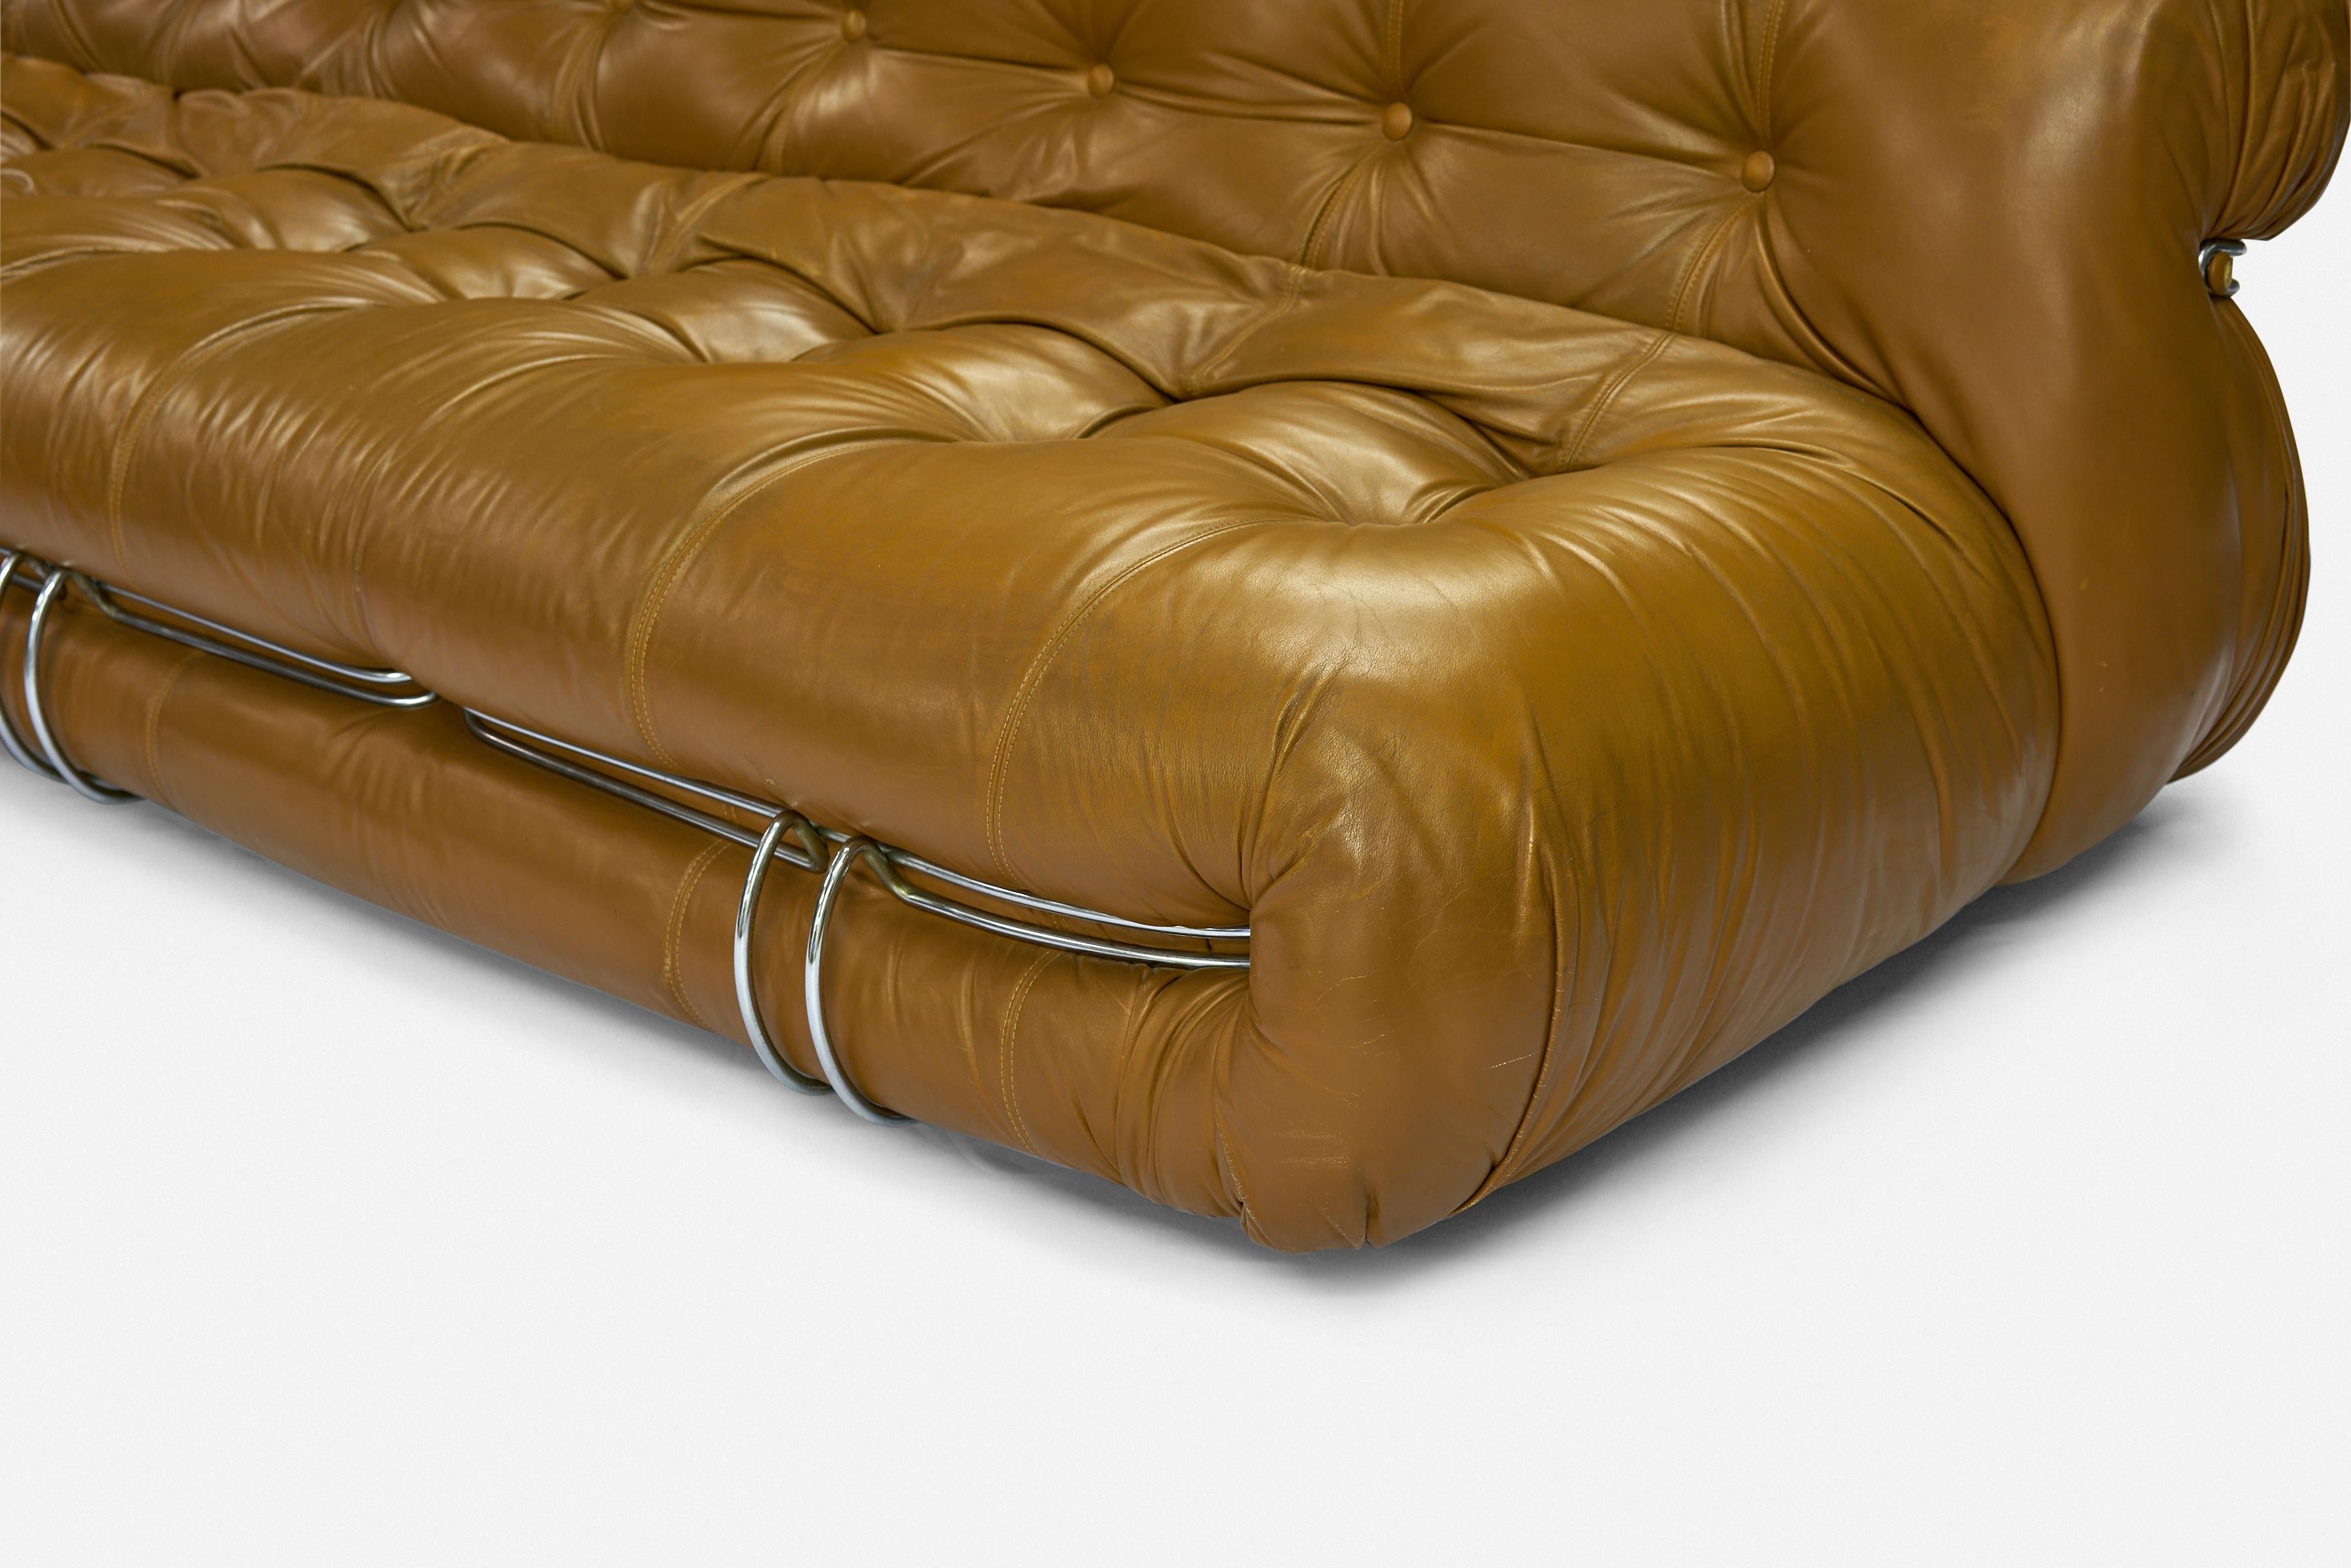 Cassina 'Soriana' Sofa by Afra and Tobia Scarpa in Original Leather For Sale 1